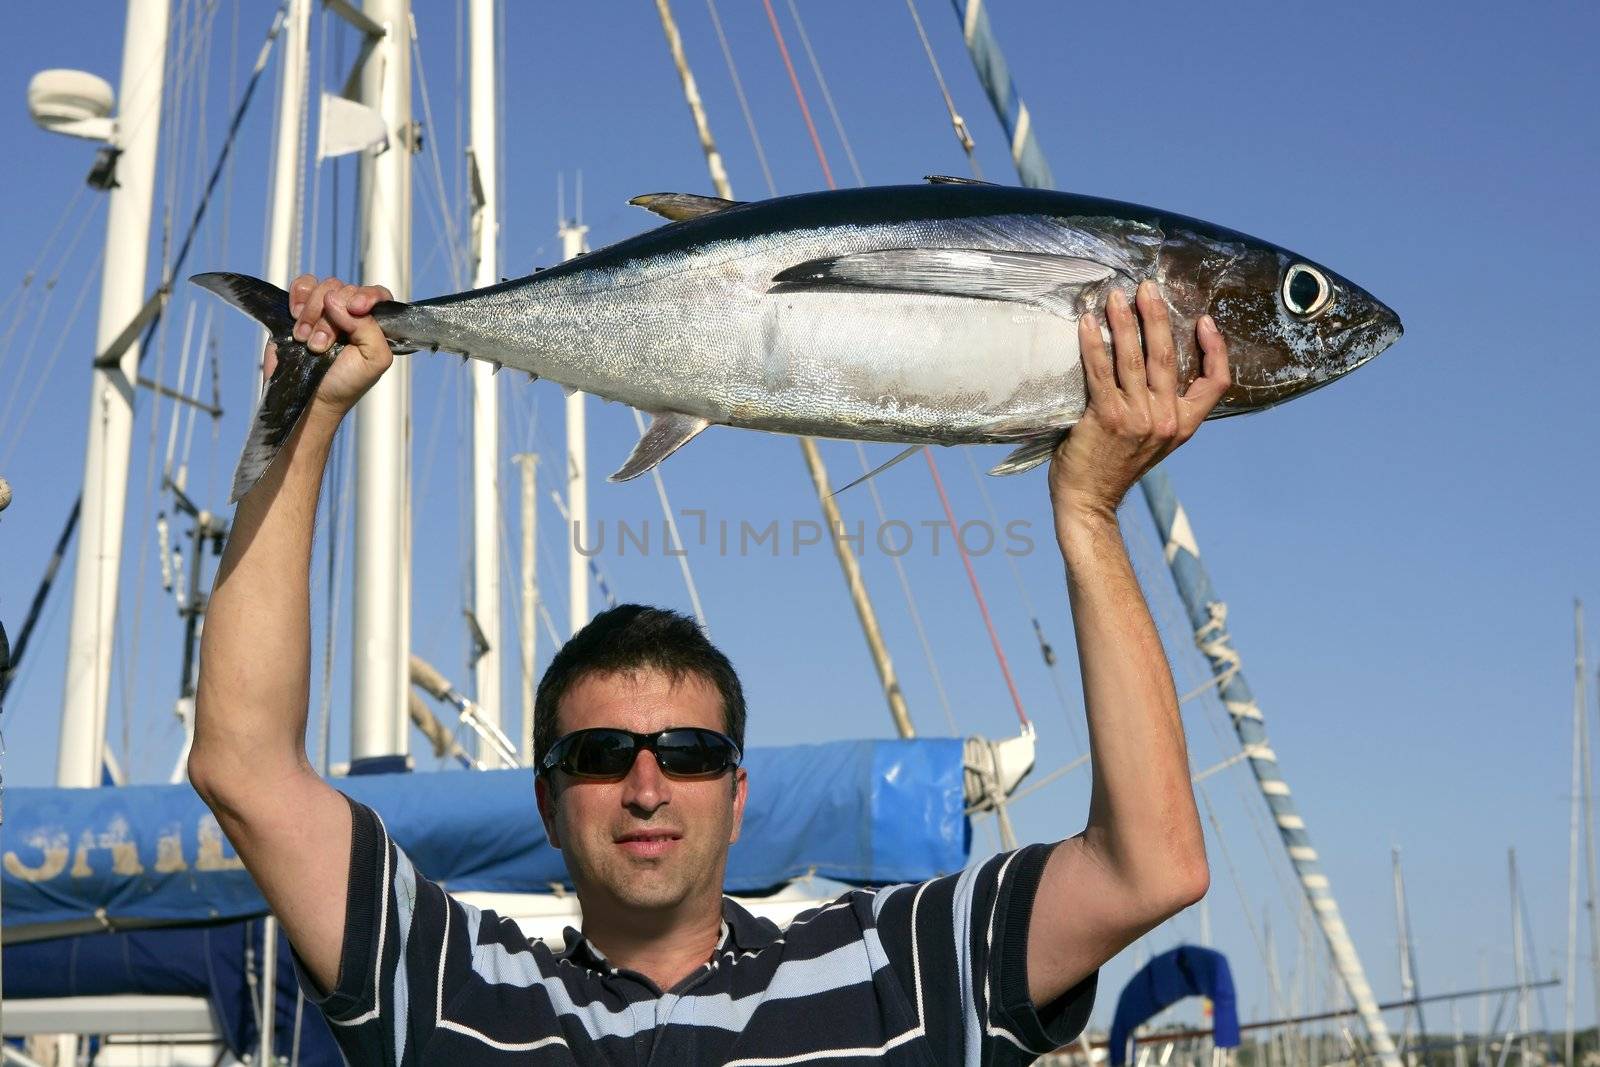 Big game fisherman with saltwater tuna catch in his hands